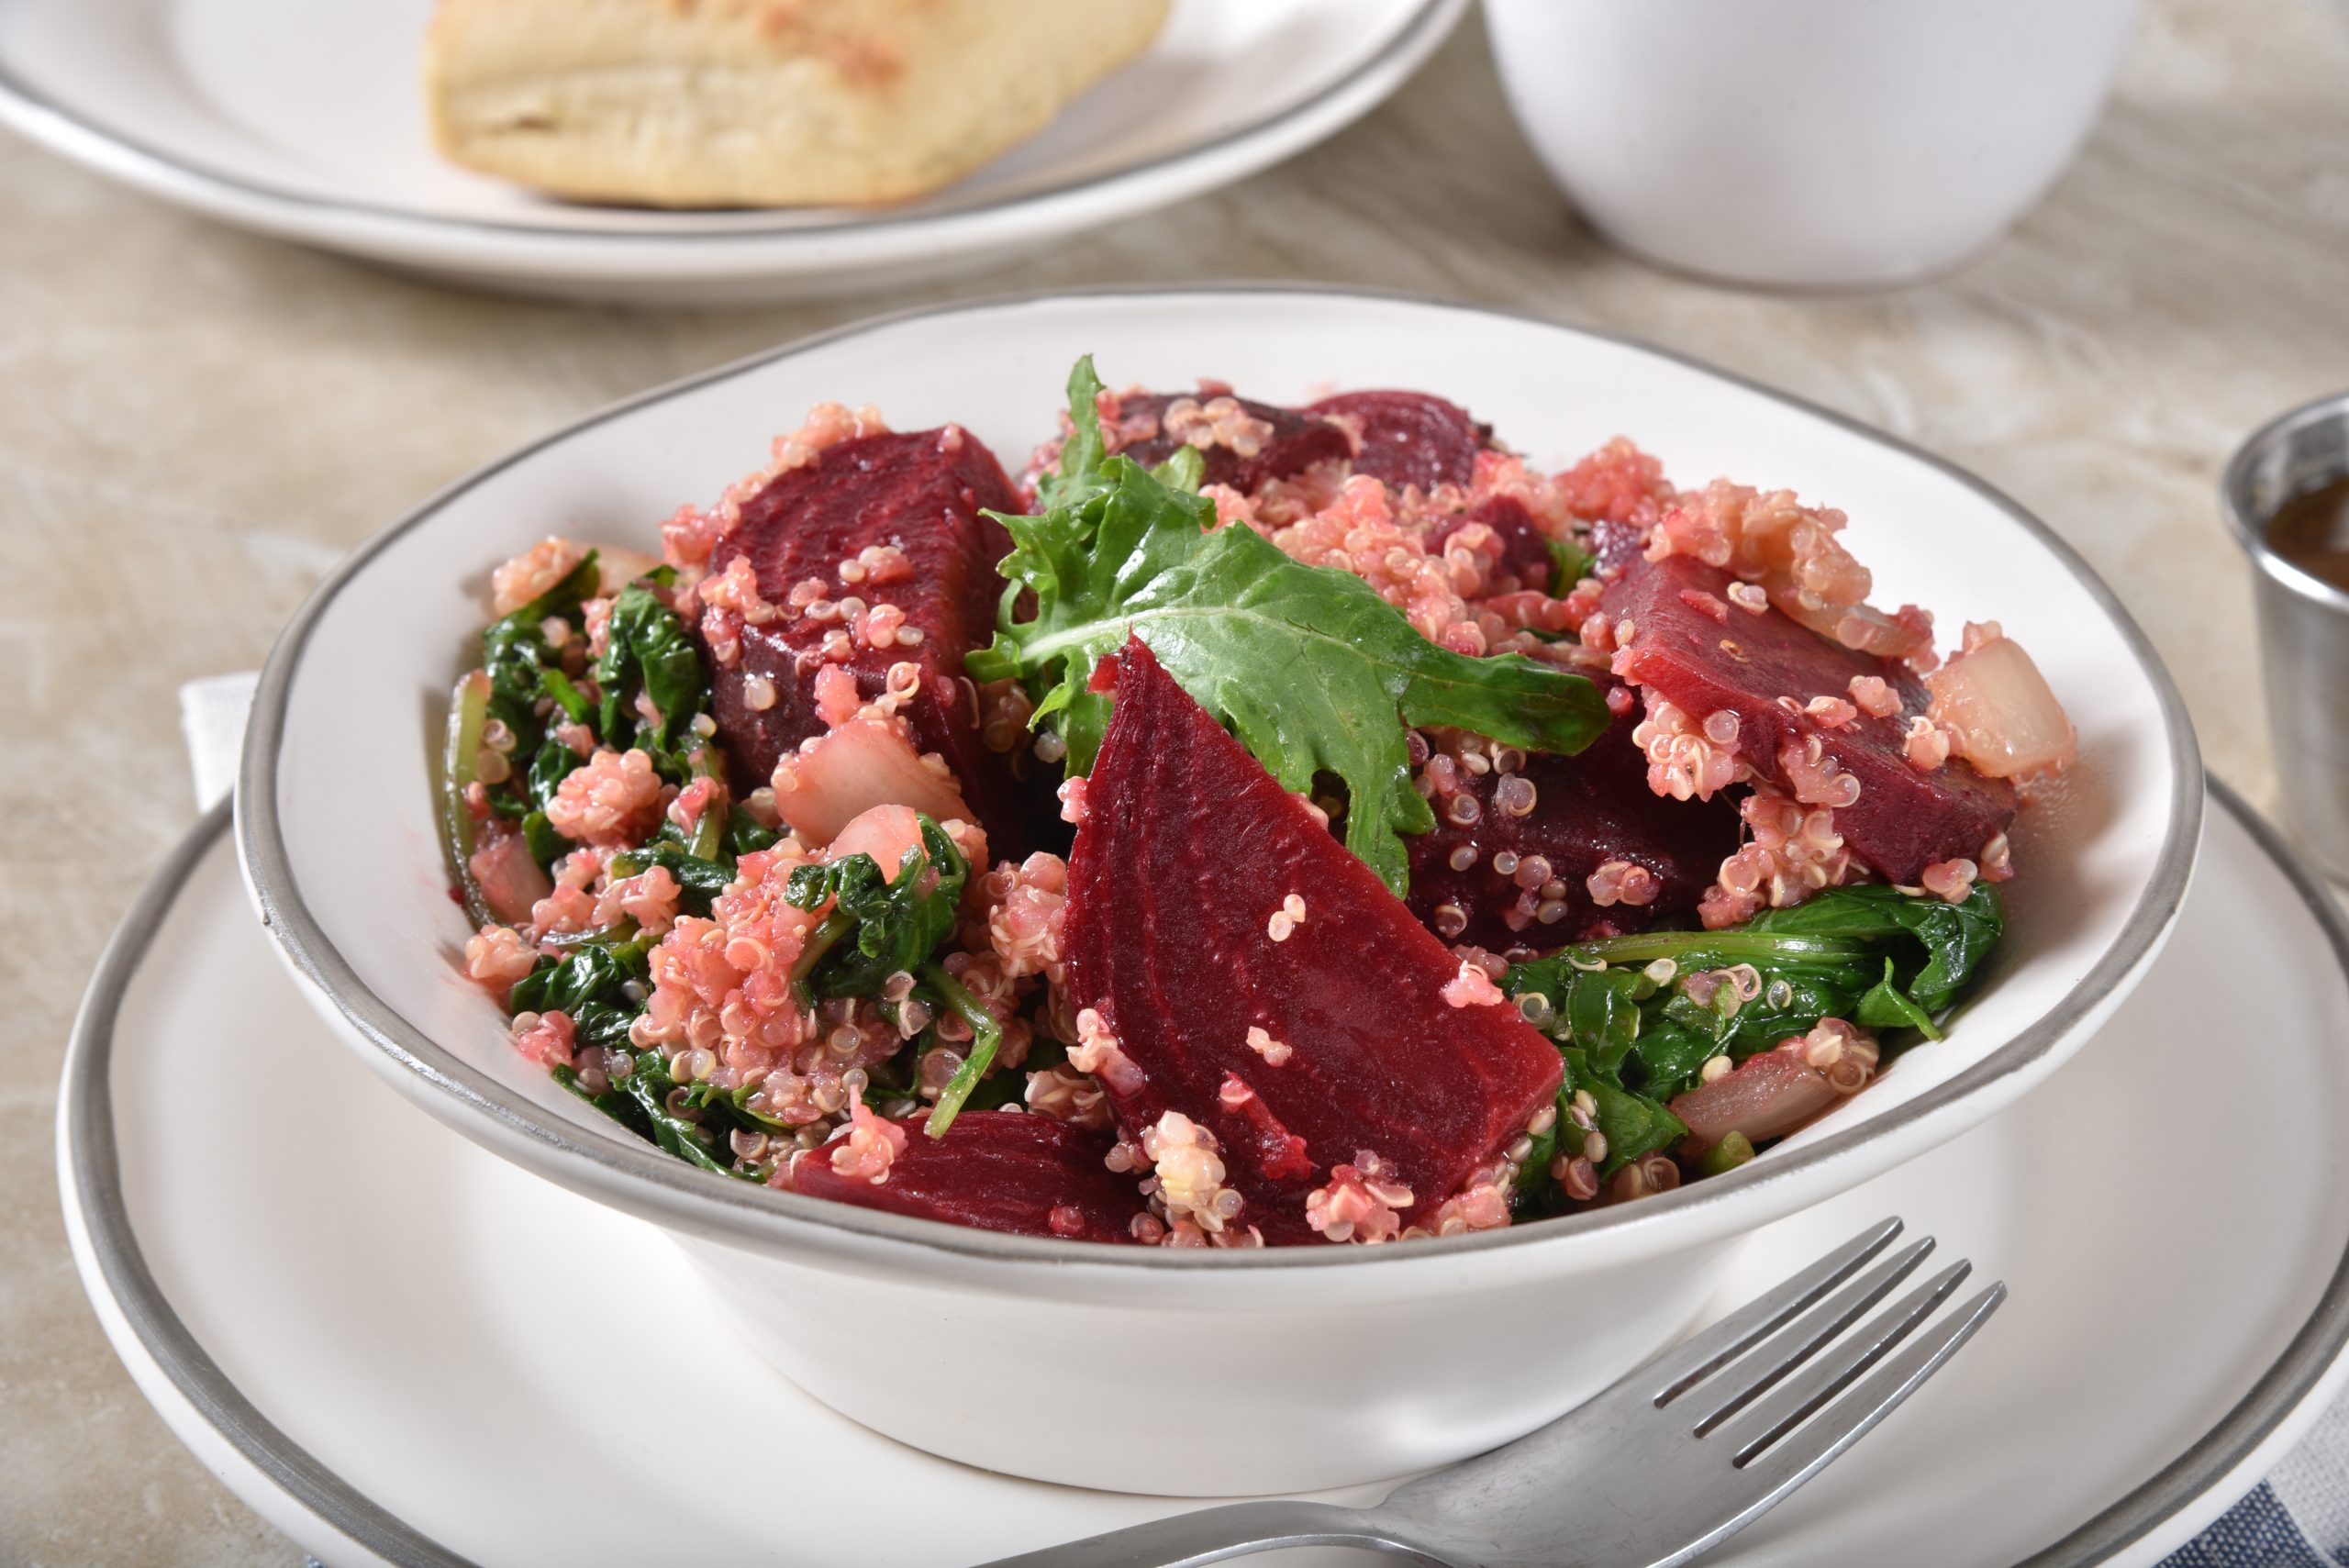 Fuel your movement recipe of the month: Quinoa salad with beets, oranges & arugula